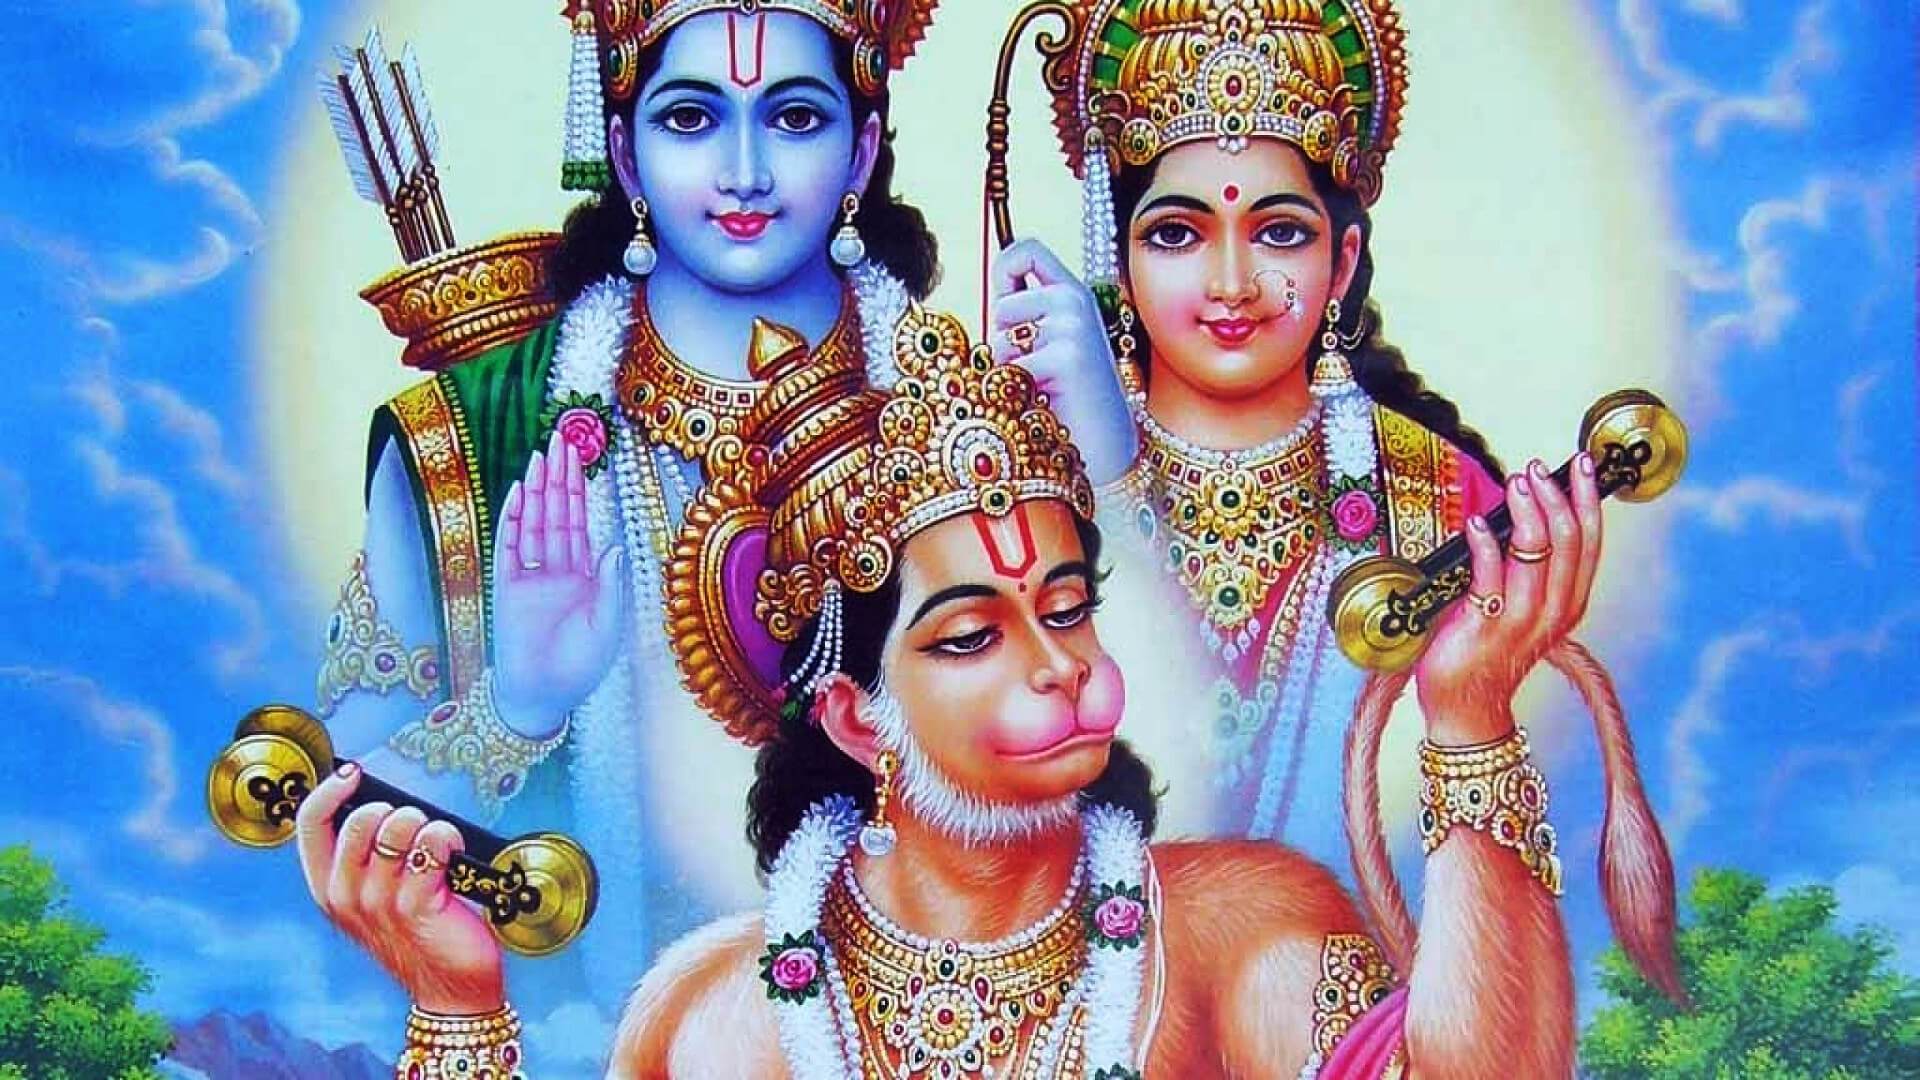 Lord Hanuman Ji Full Hd Wallpaper Download Hanuman Rama And Sita 95486 Hd Wallpaper Backgrounds Download Choose from a curated selection of 1920x1080 wallpapers for your mobile and desktop screens. lord hanuman ji full hd wallpaper